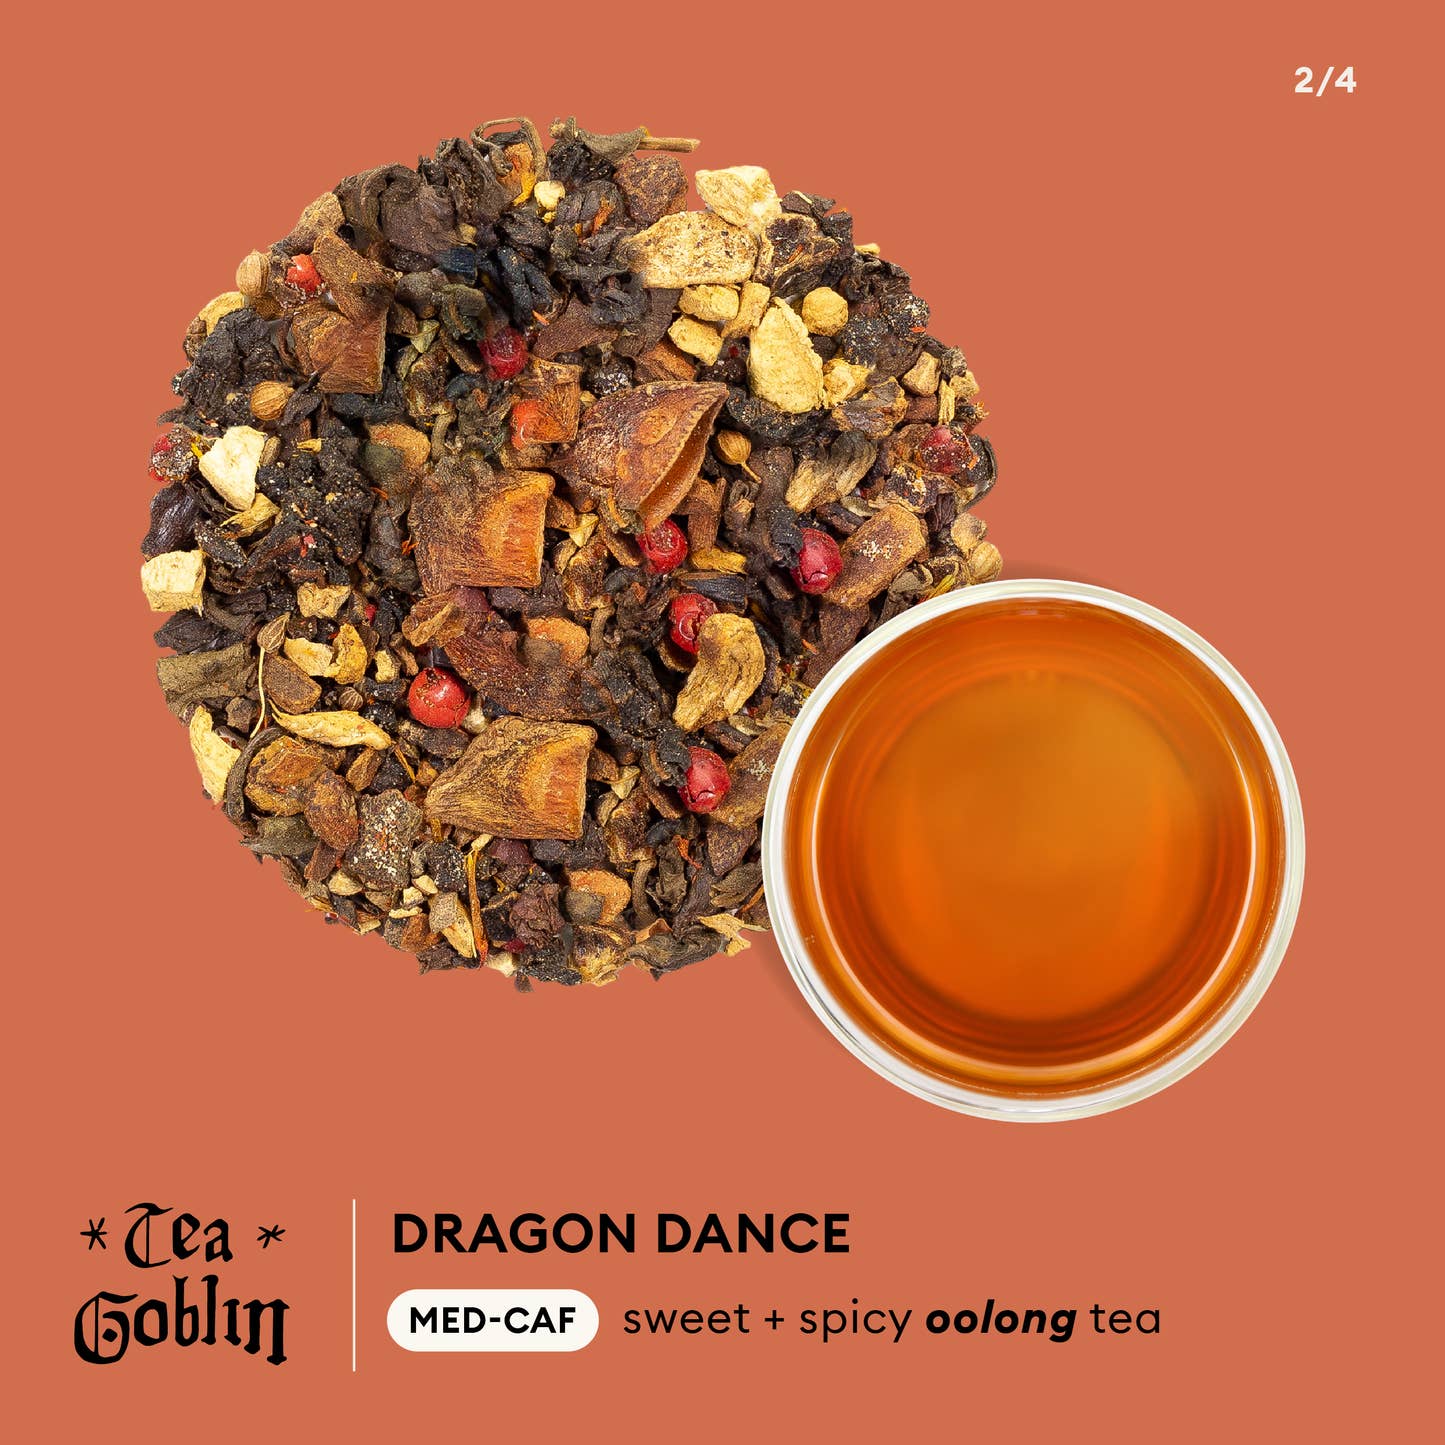 Tea Goblin - Dragon Dance low-caf, sweet + spicy oolong tea infographic